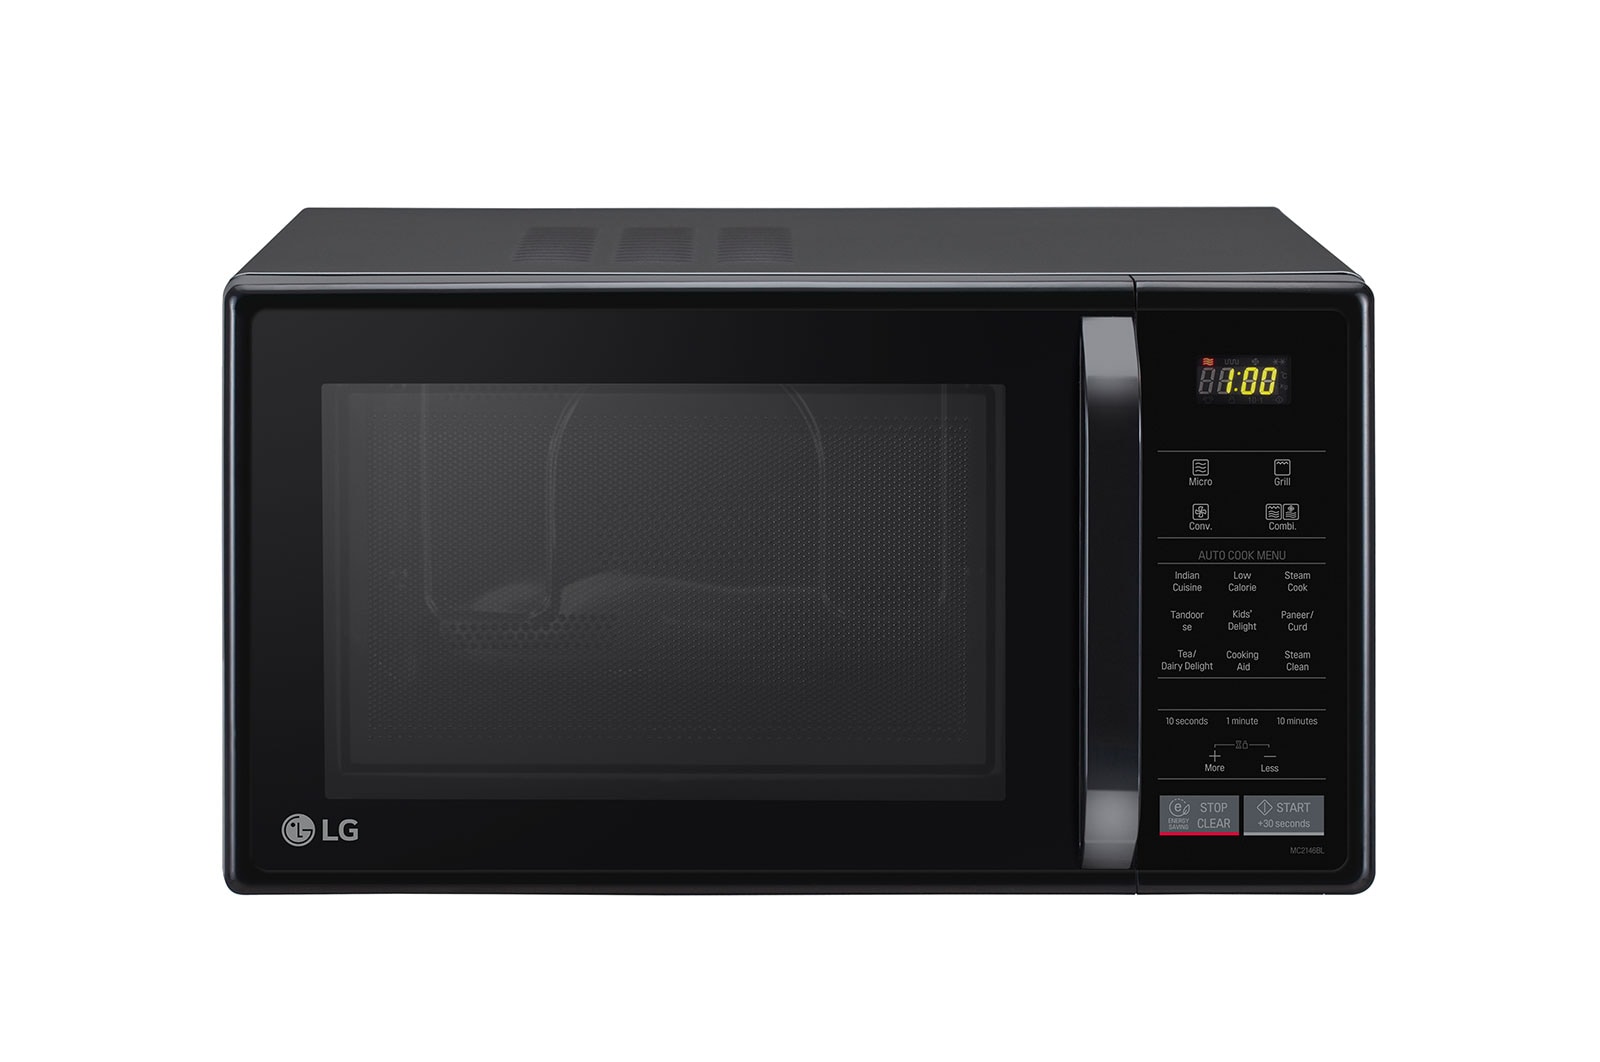 LG Convection Healthy Ovens, MC2146BL